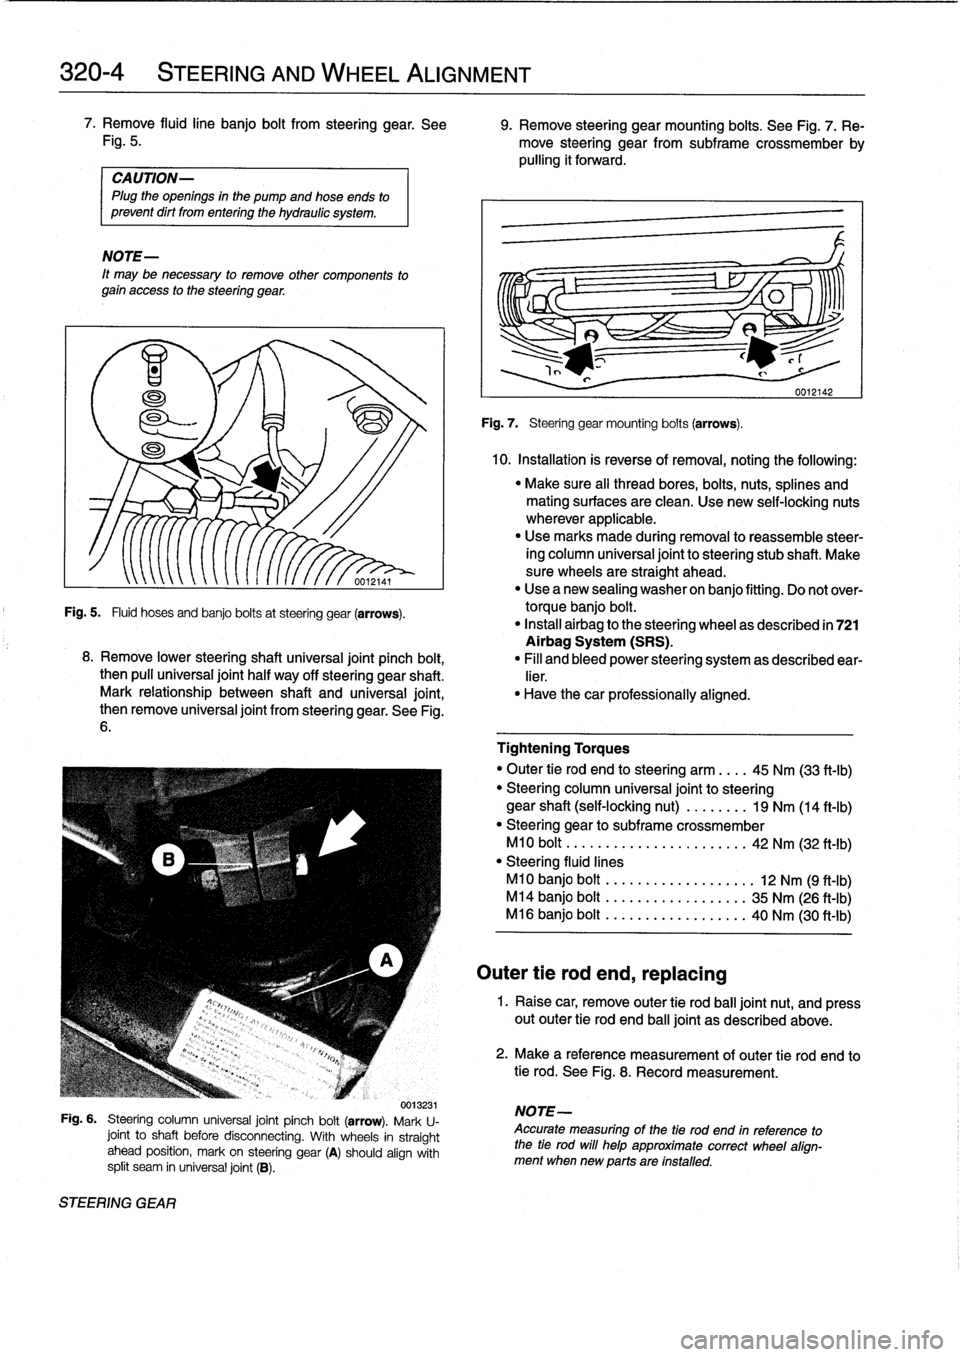 BMW 328i 1997 E36 Workshop Manual 
320-
4

	

STEERING
AND
WHEEL
ALIGNMENT

7
.
Remove
fluidline
banjo
bolt
from
steering
gear
.
See

	

9
.
Remove
steering
gearmounting
bolts
.
See
Fig
.
7
.
Re
Fig
.
5
.

	

move
steering
gear
from
s